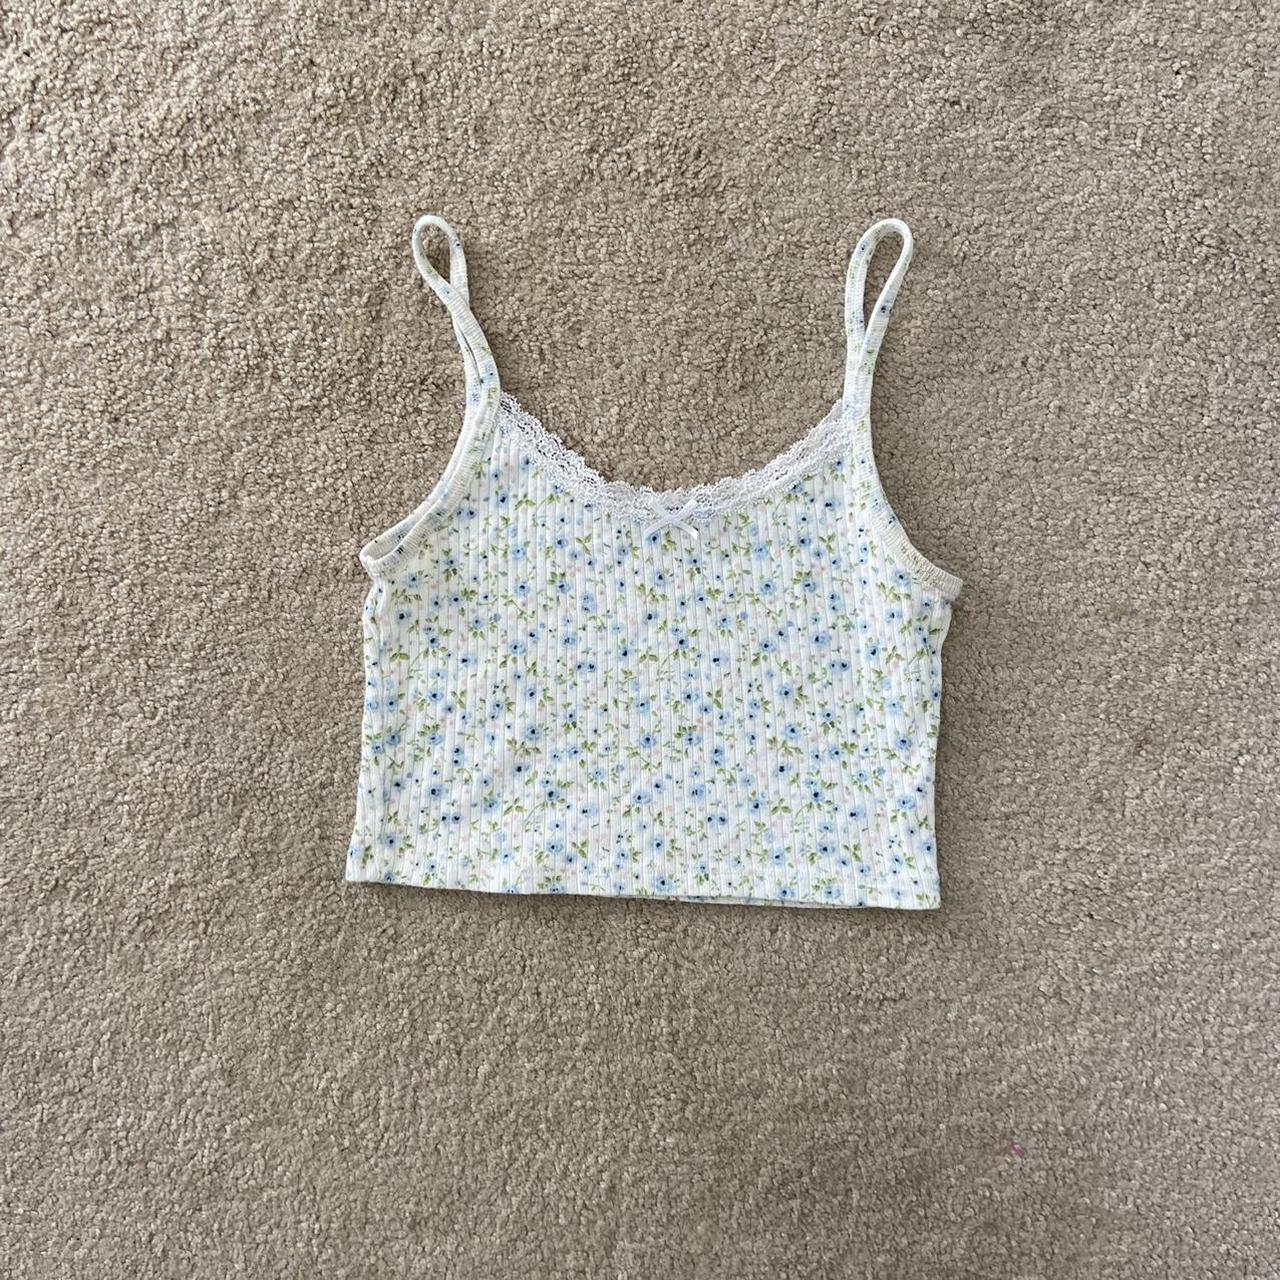 Product Image 1 - NWT brandy melville floral pointelle